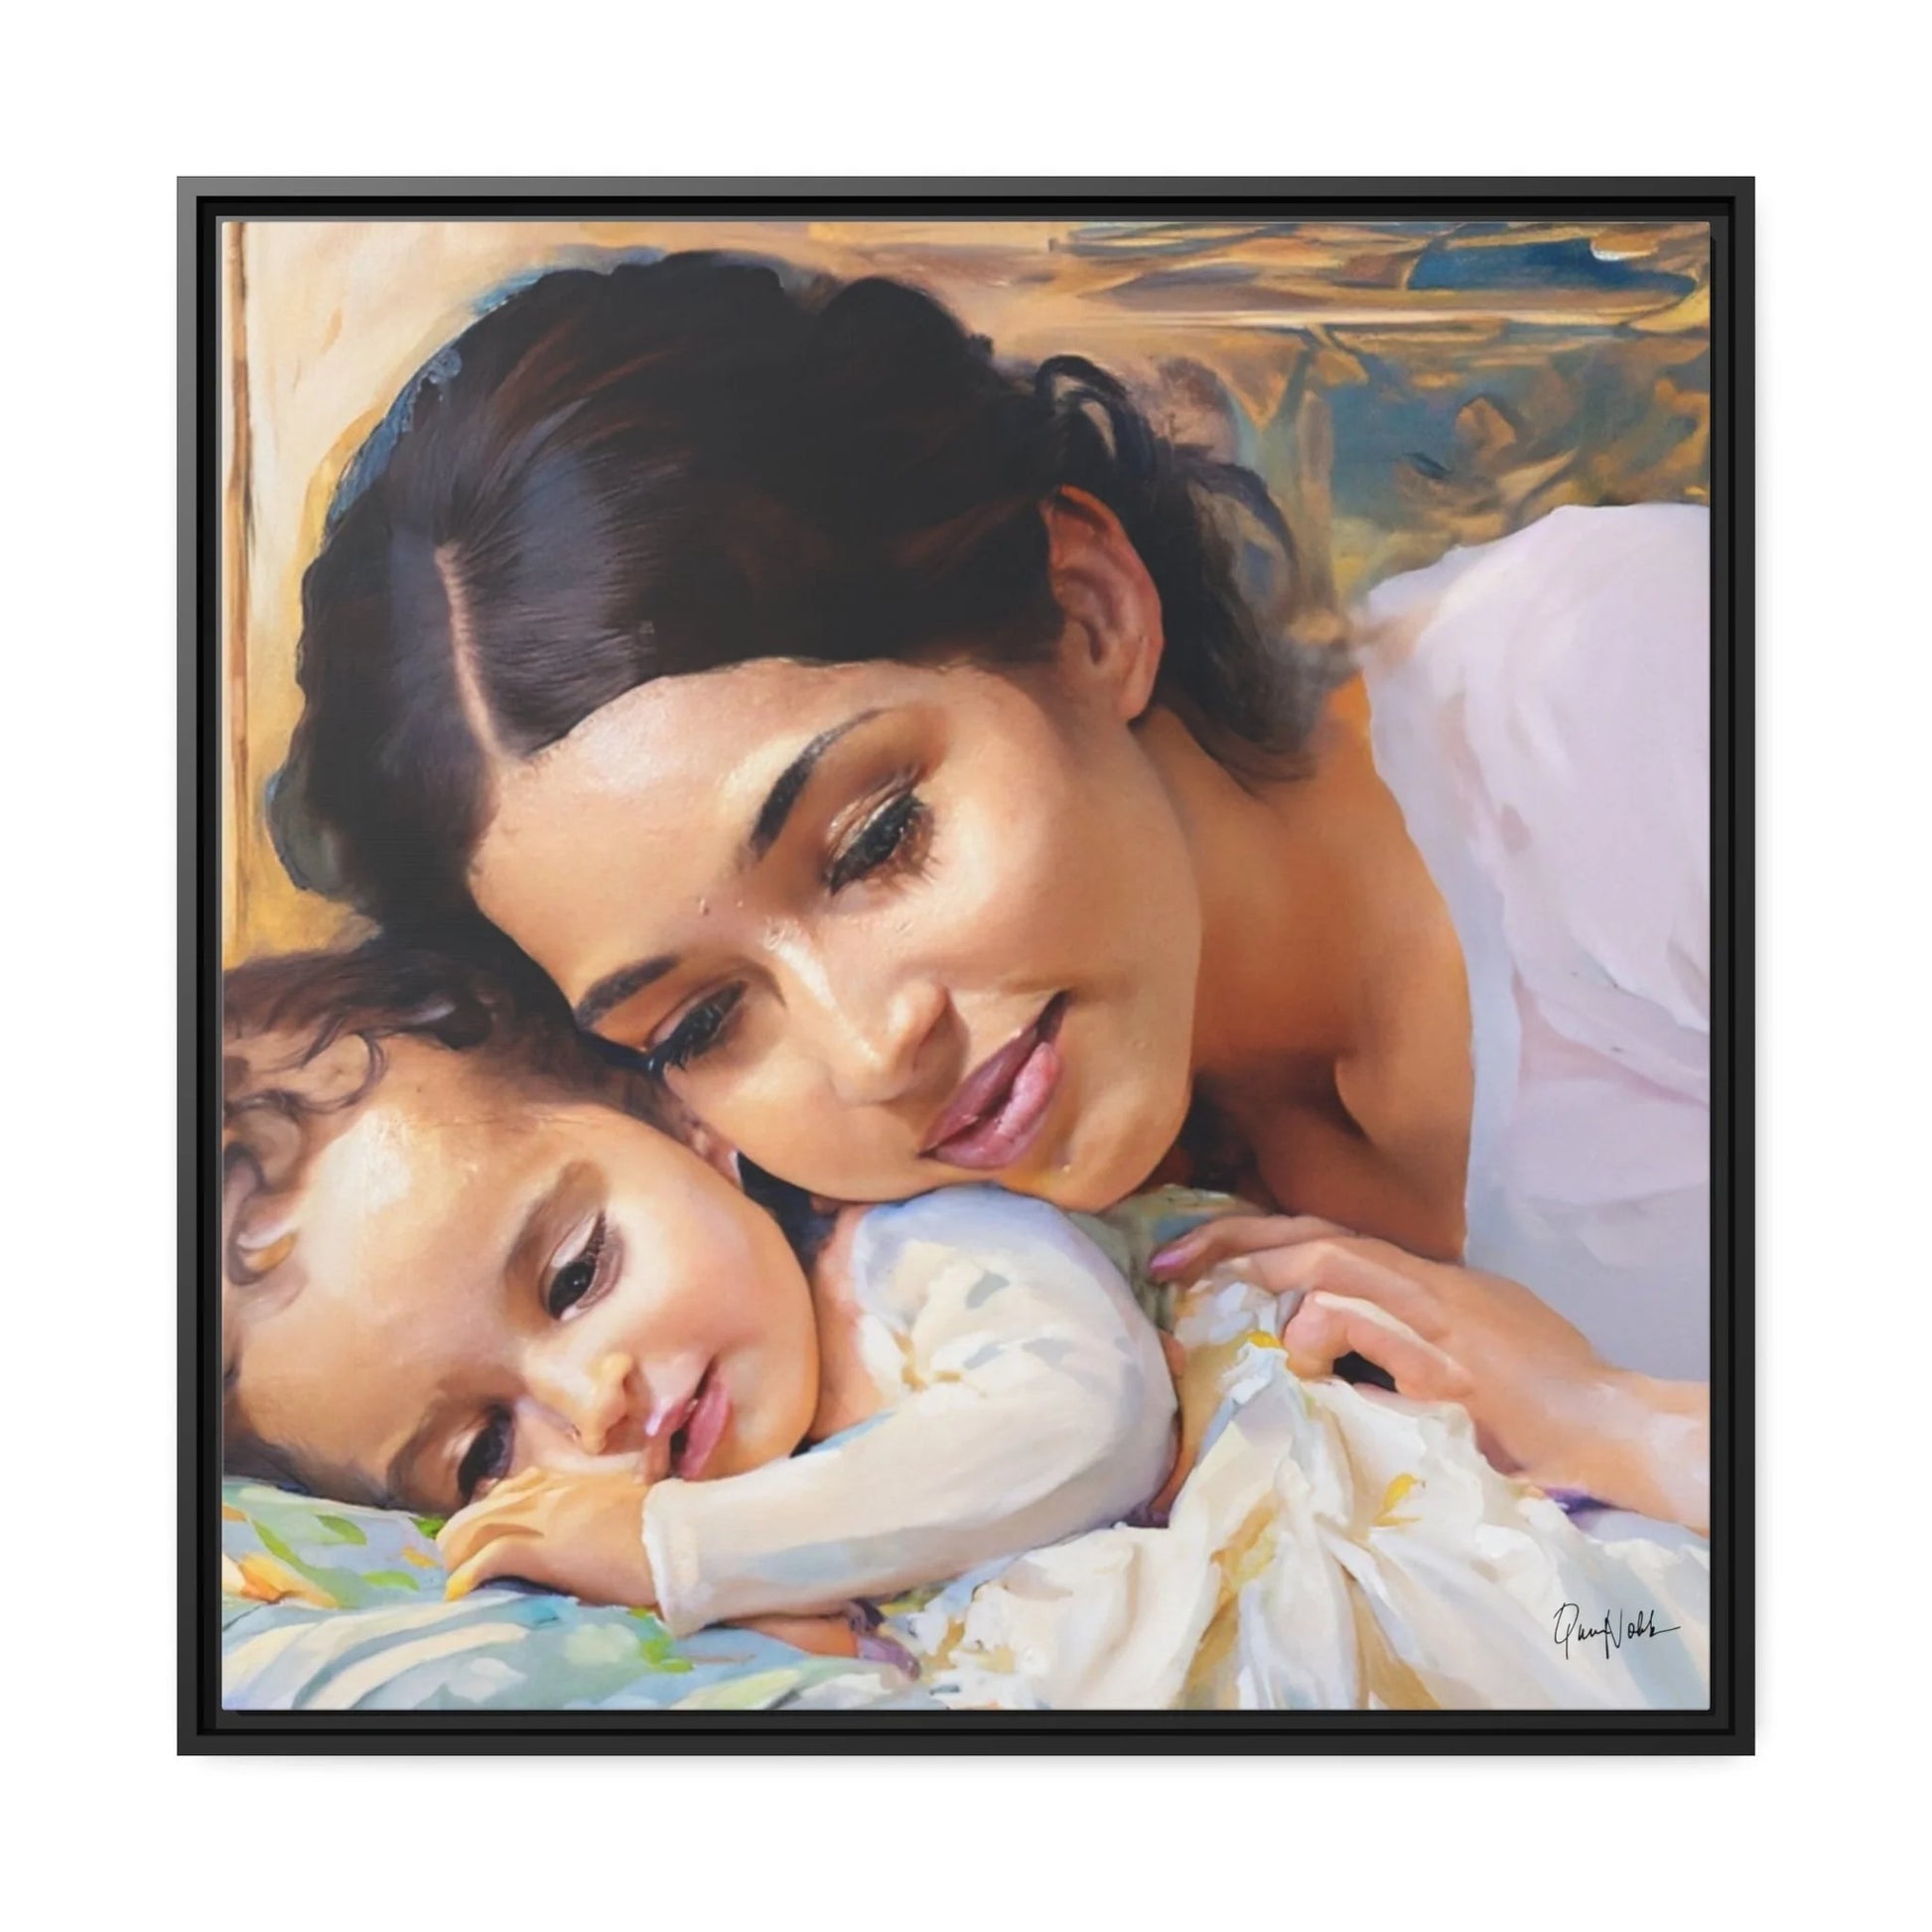 Framed Canvas Wall Art MOTHER and BABY - by Queennoble